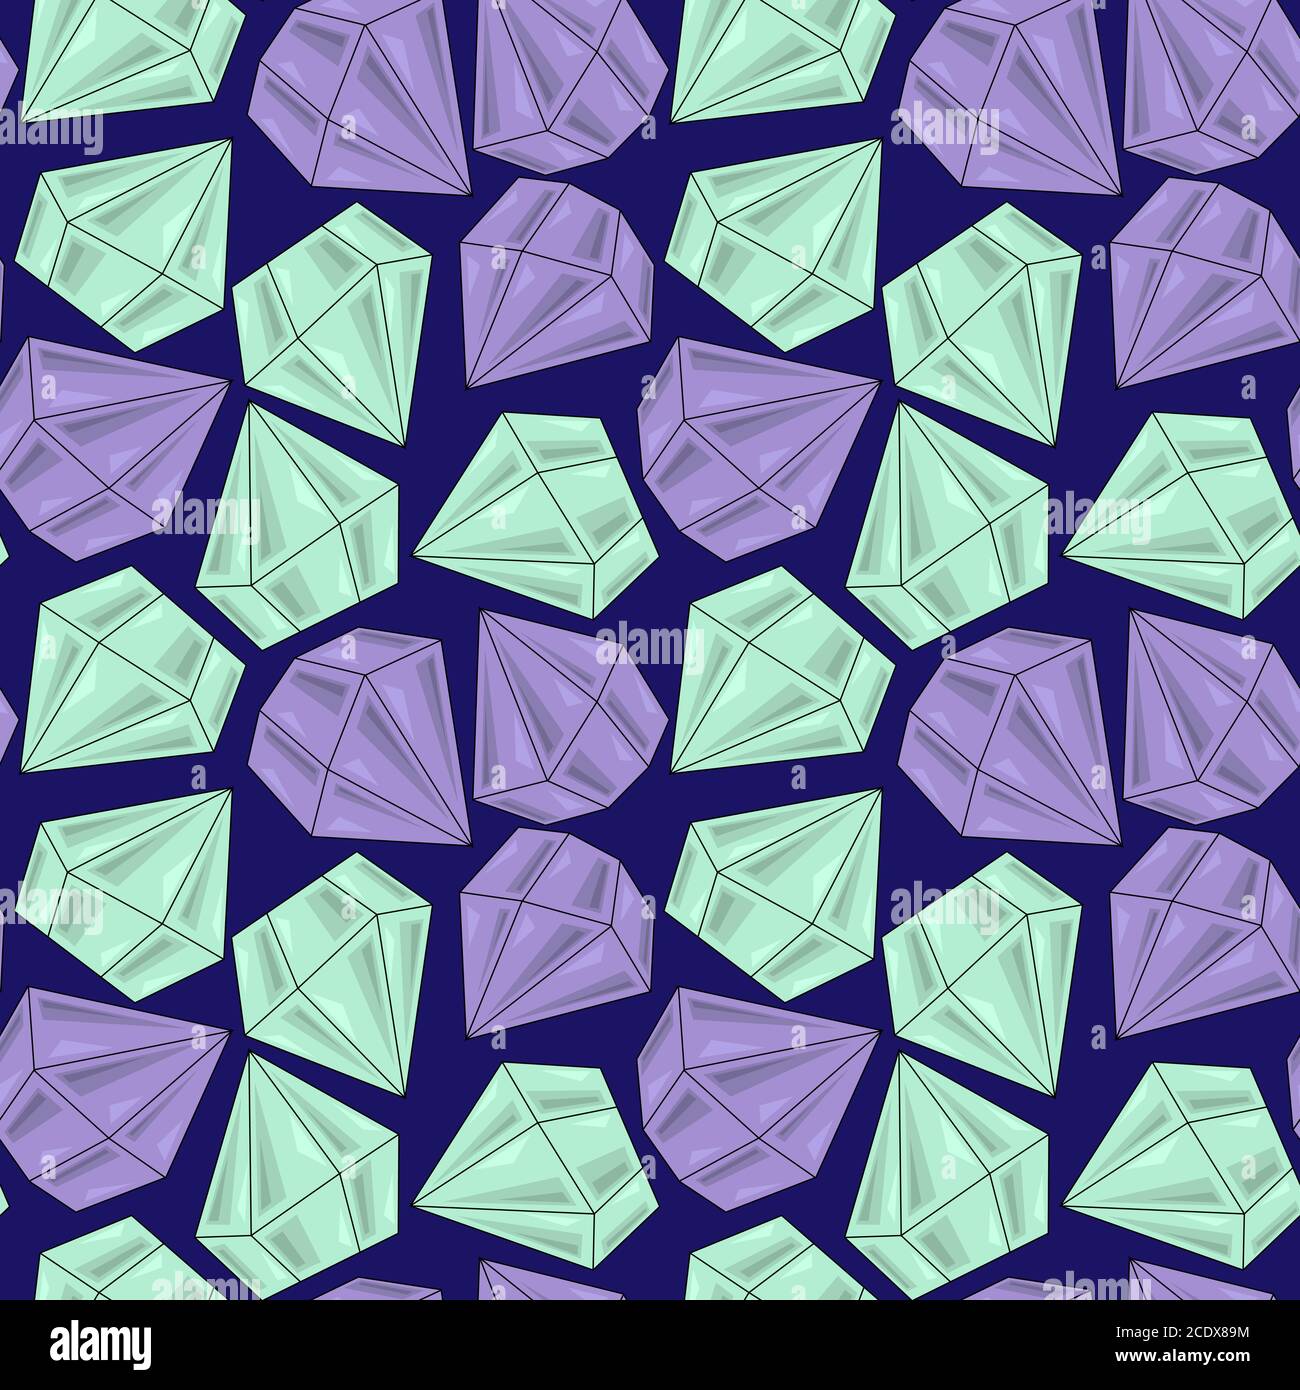 Seamless pattern with blue and purple diamonds Stock Vector